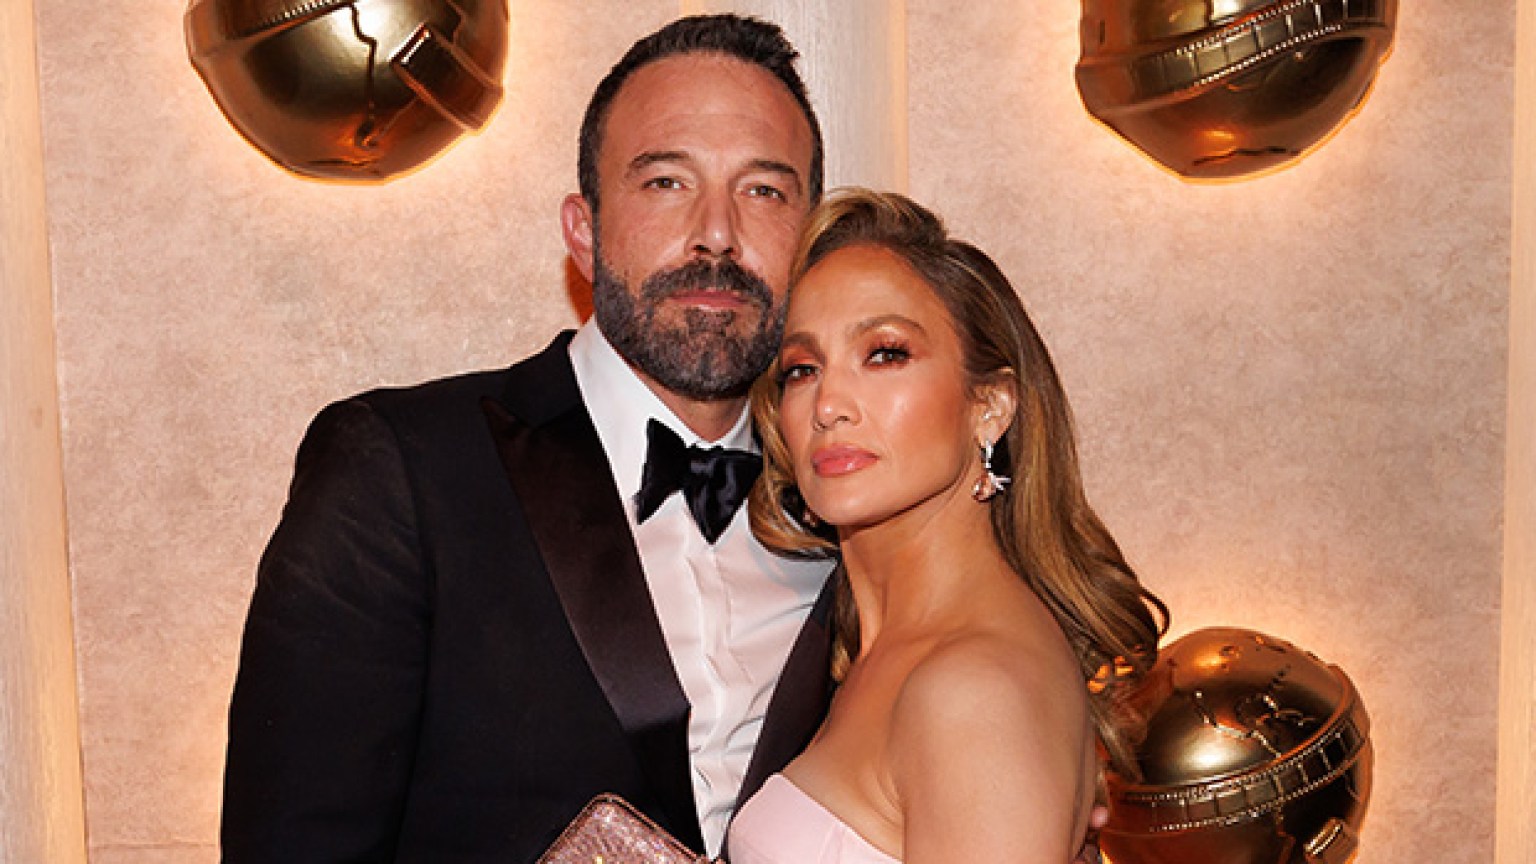 Jennifer Lopez Sings About Intimacy With Ben Affleck In New Song